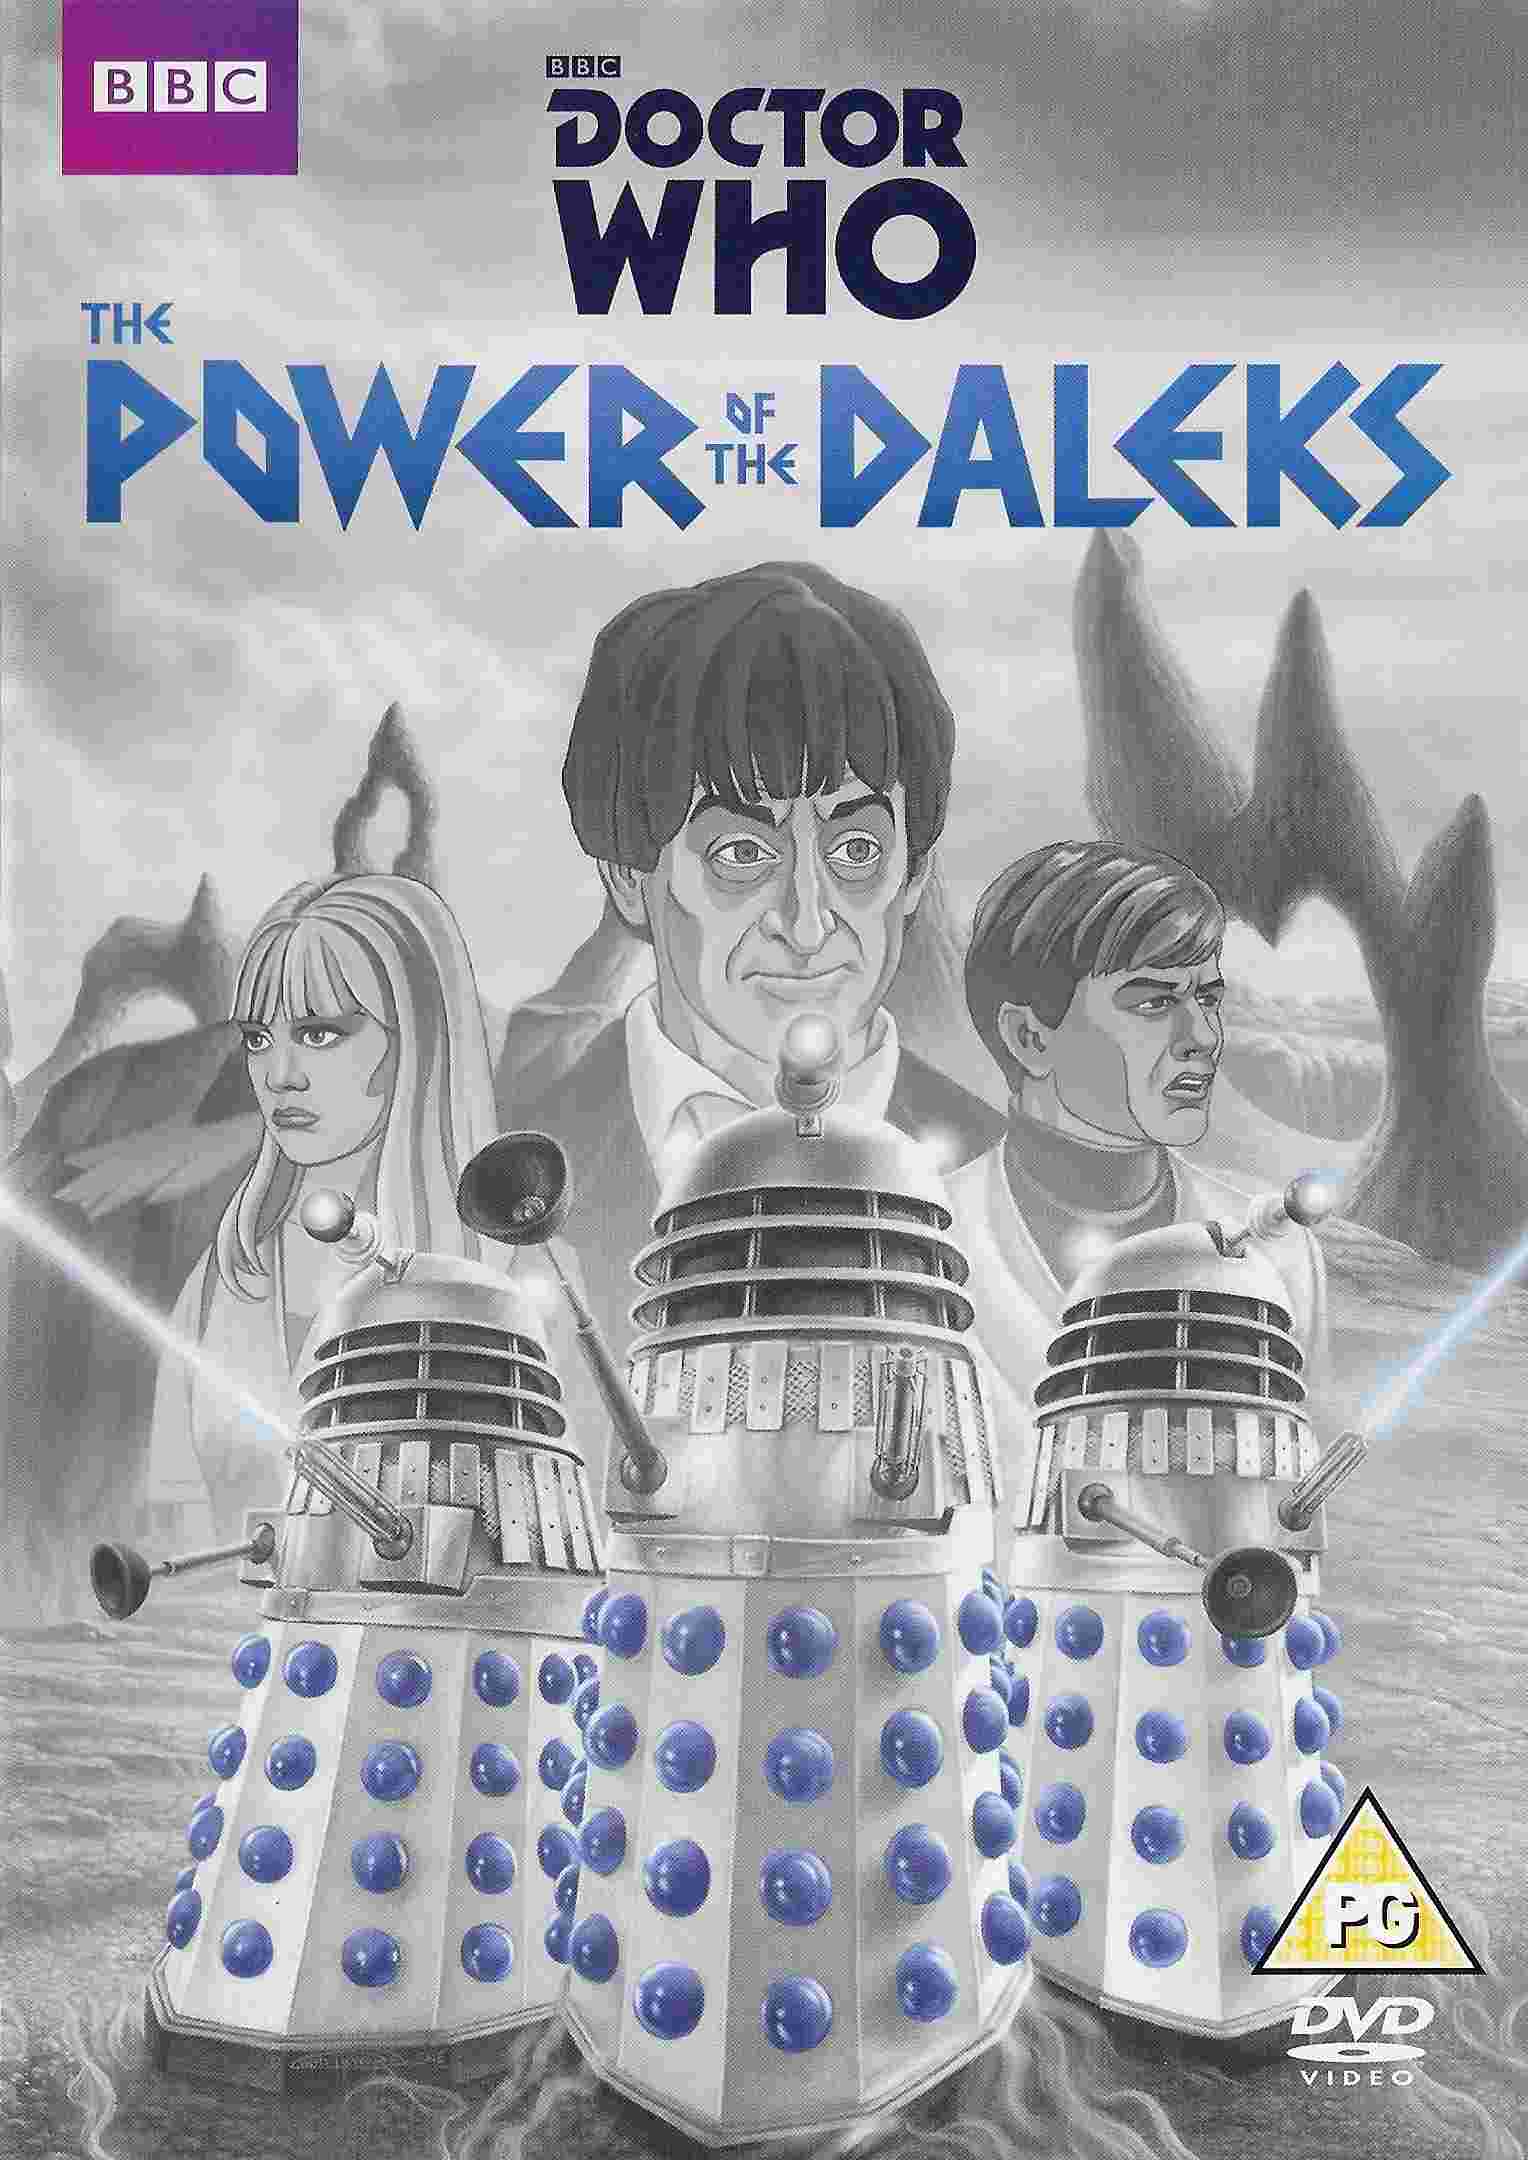 Picture of BBCDVD 4163 Doctor Who - The power of the Daleks by artist David Whitaker / Dennis Spooner from the BBC dvds - Records and Tapes library